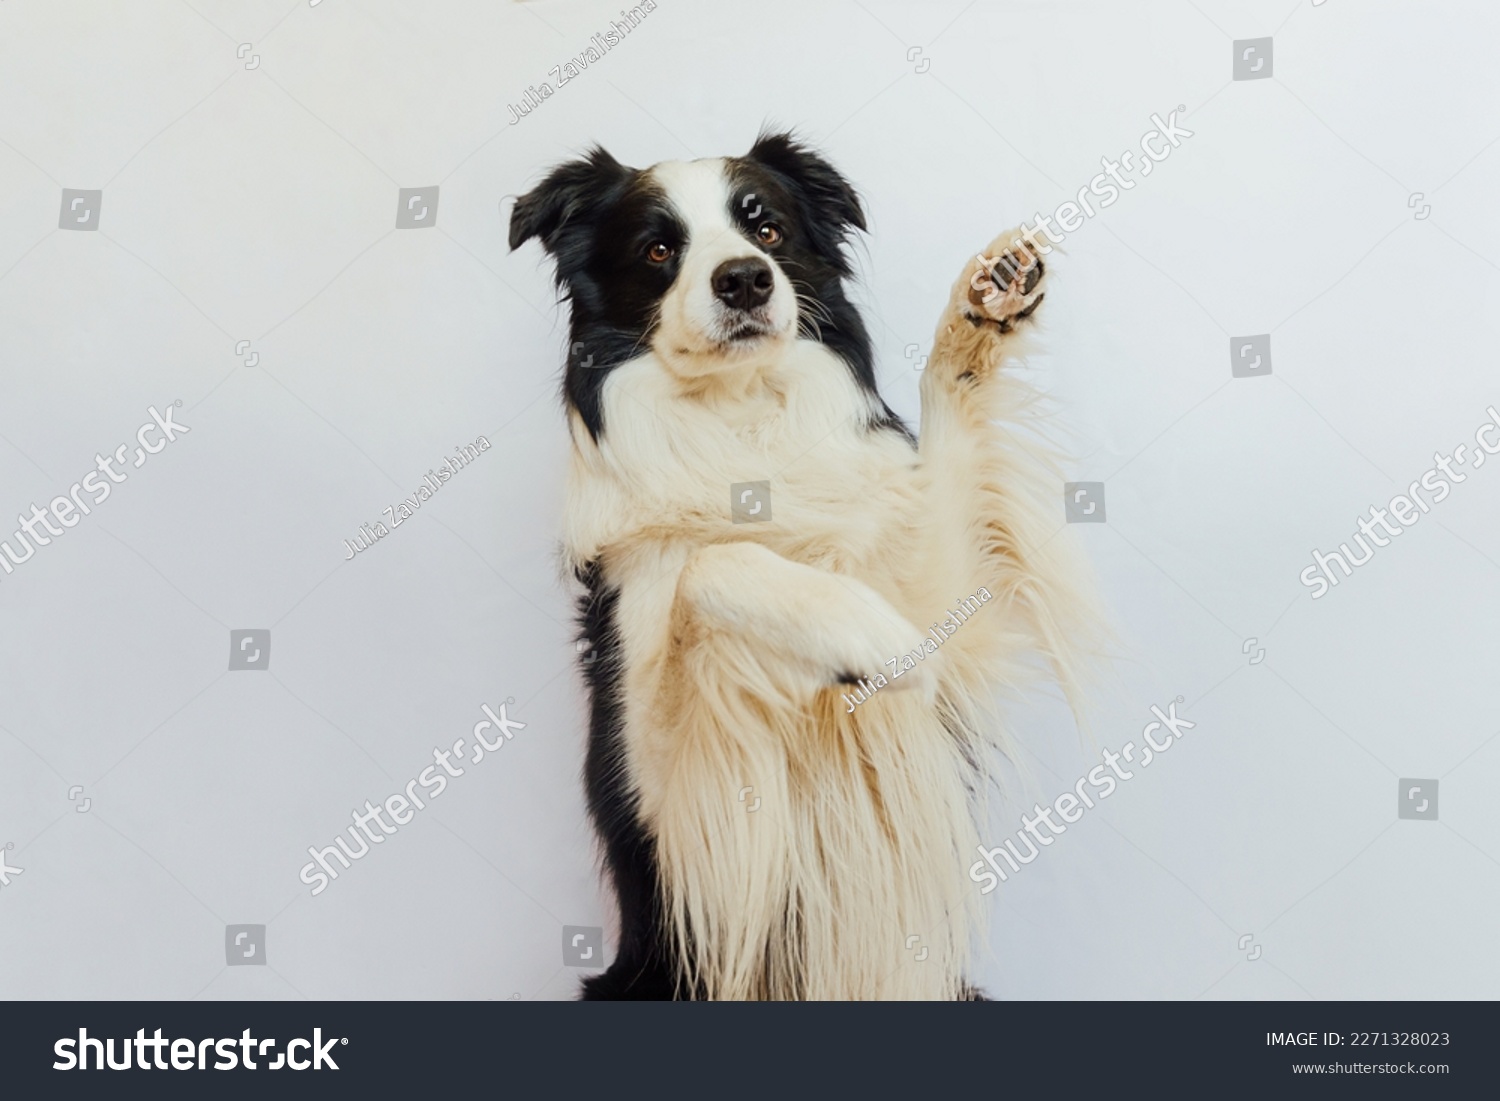 Funny emotional dog. Cute puppy dog border collie with funny face waving paw isolated on white background. Cute pet dog, cute pose. Dog raise paw up. Pet animal life concept #2271328023